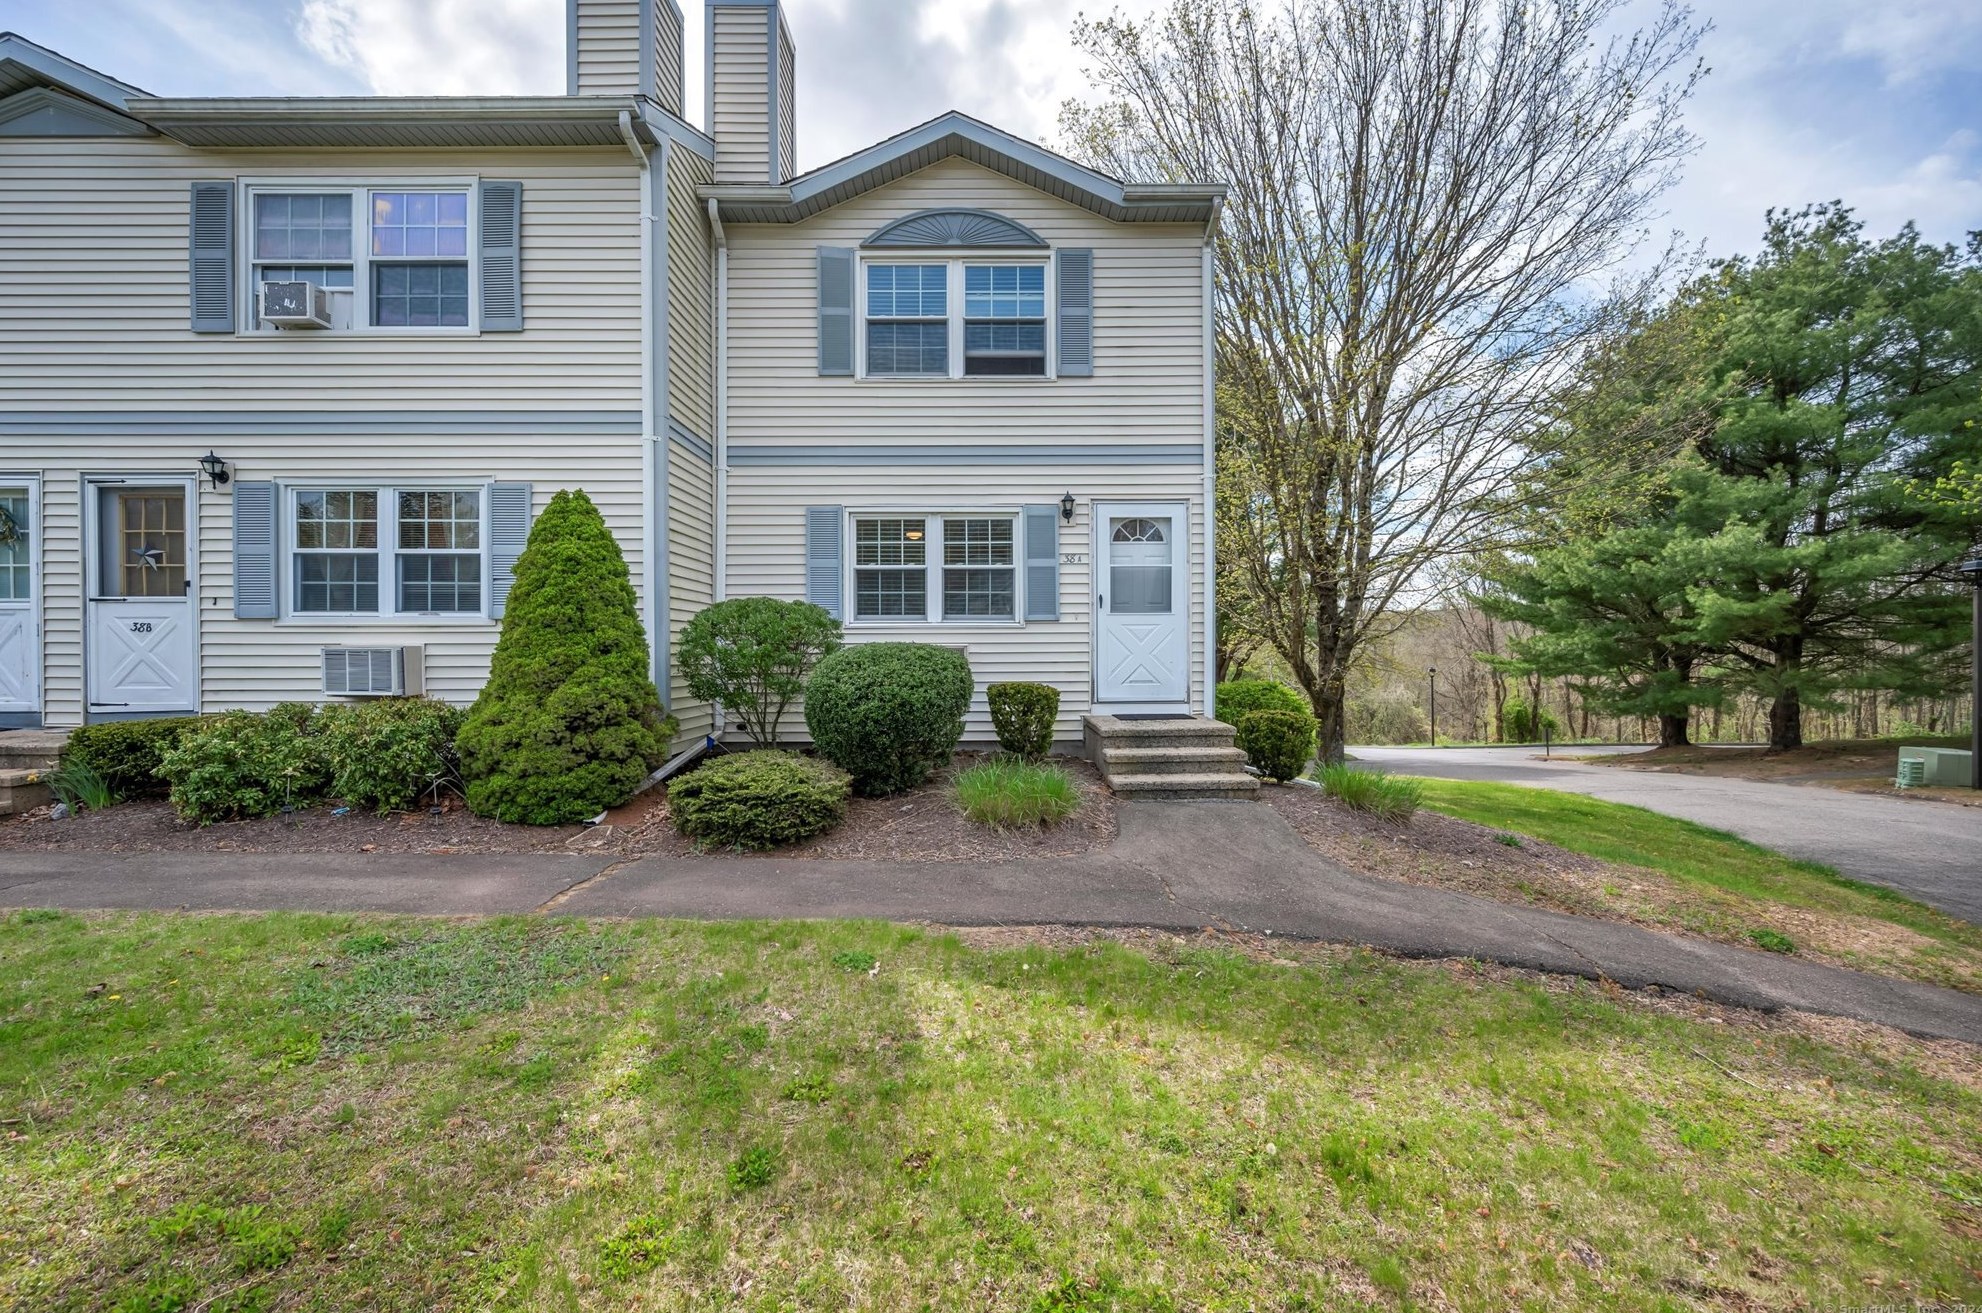 38 Crystal Ln, Storrs Mansfield, CT 06268